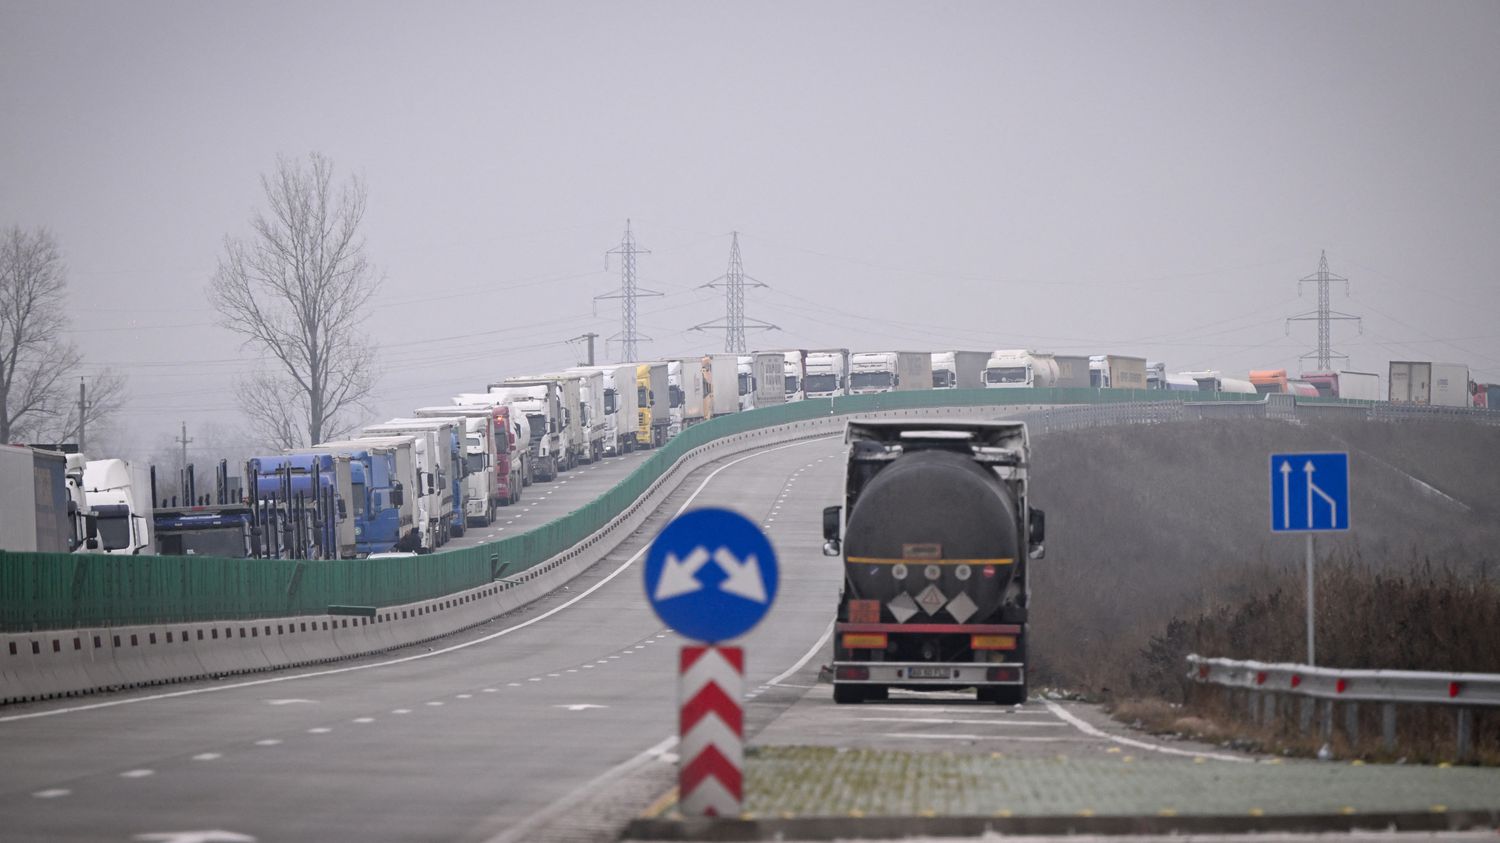 Schengen enlargement: requests from Bulgaria and Romania are rejected
